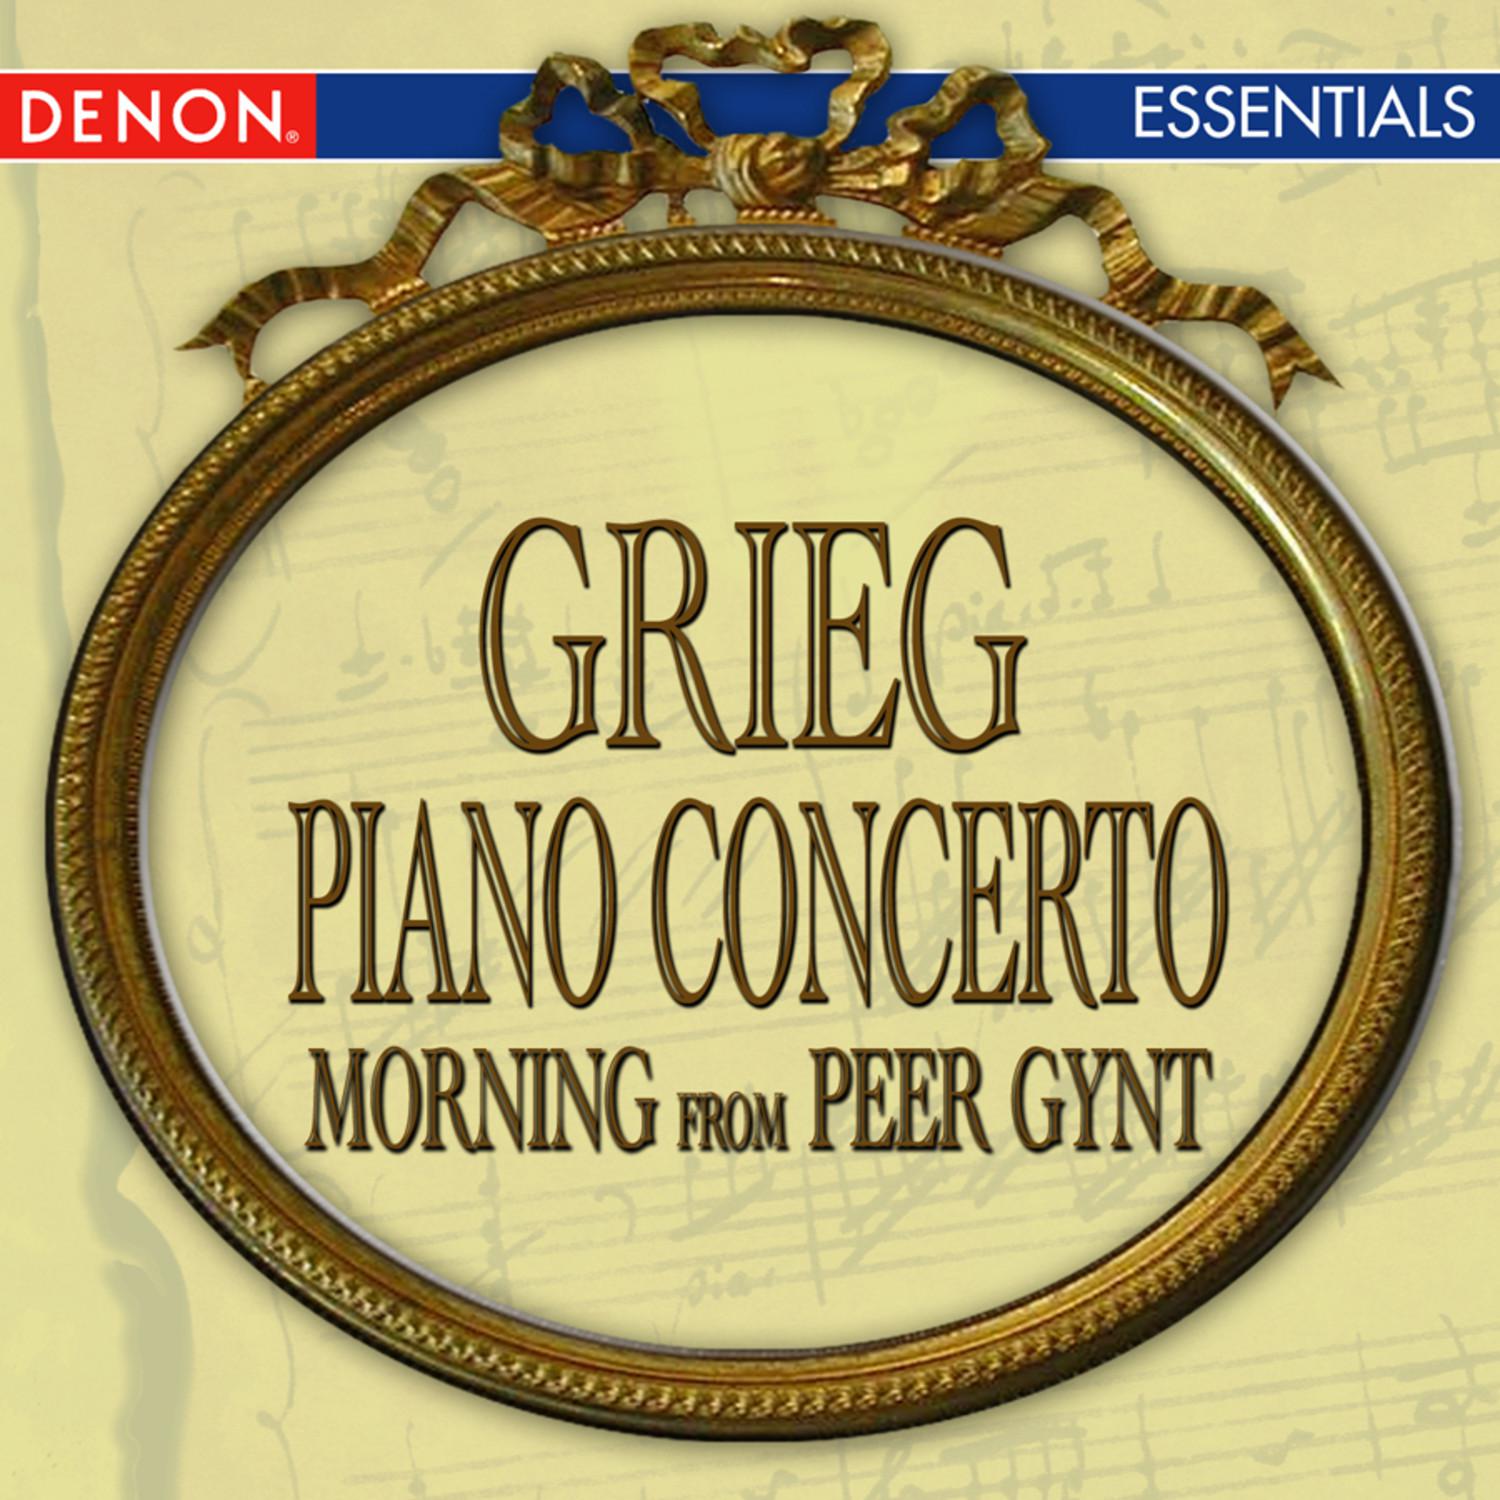 Grieg: Piano Concerto - Morning from Peer Gynt